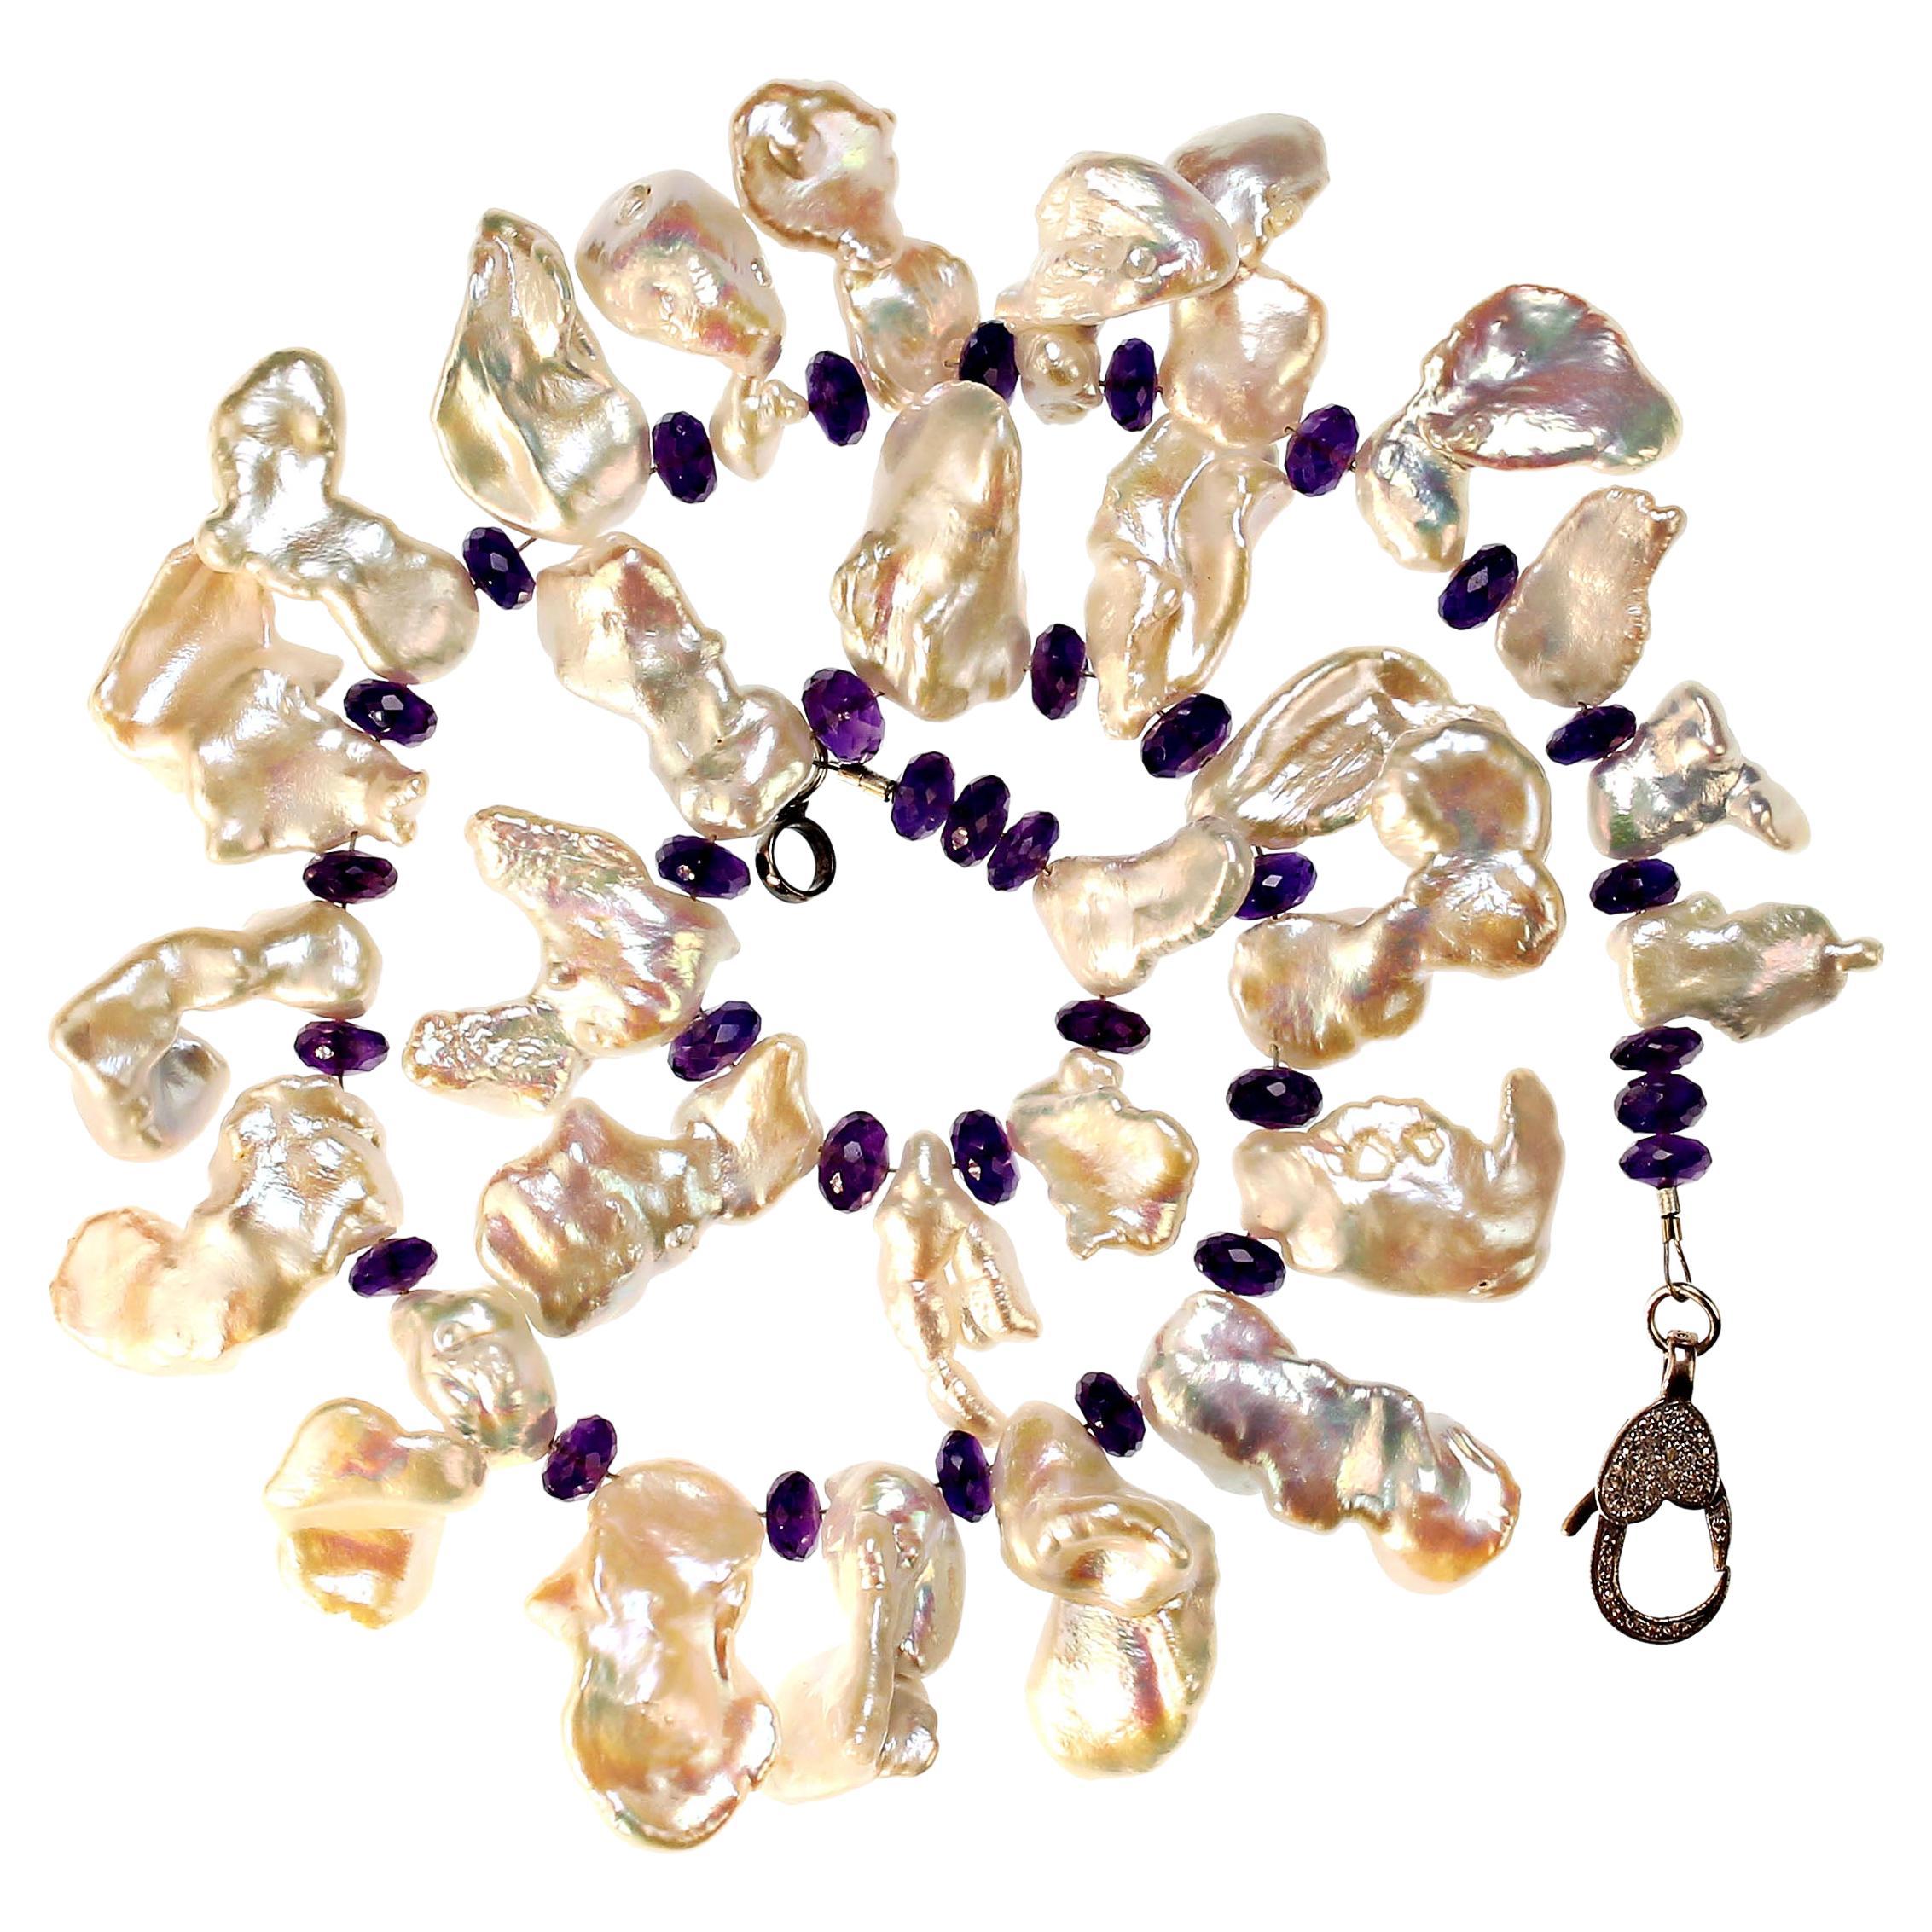 Own the jewelry you wish for

Delightful, custom made necklace of free form iridescent Pearls and sparkling Amethyst rondelles.  The pearls are gently graduated from 17x8 mm to 23x12 mm.  The amethyst is 6 mm. This lovely 17 inch necklace combines